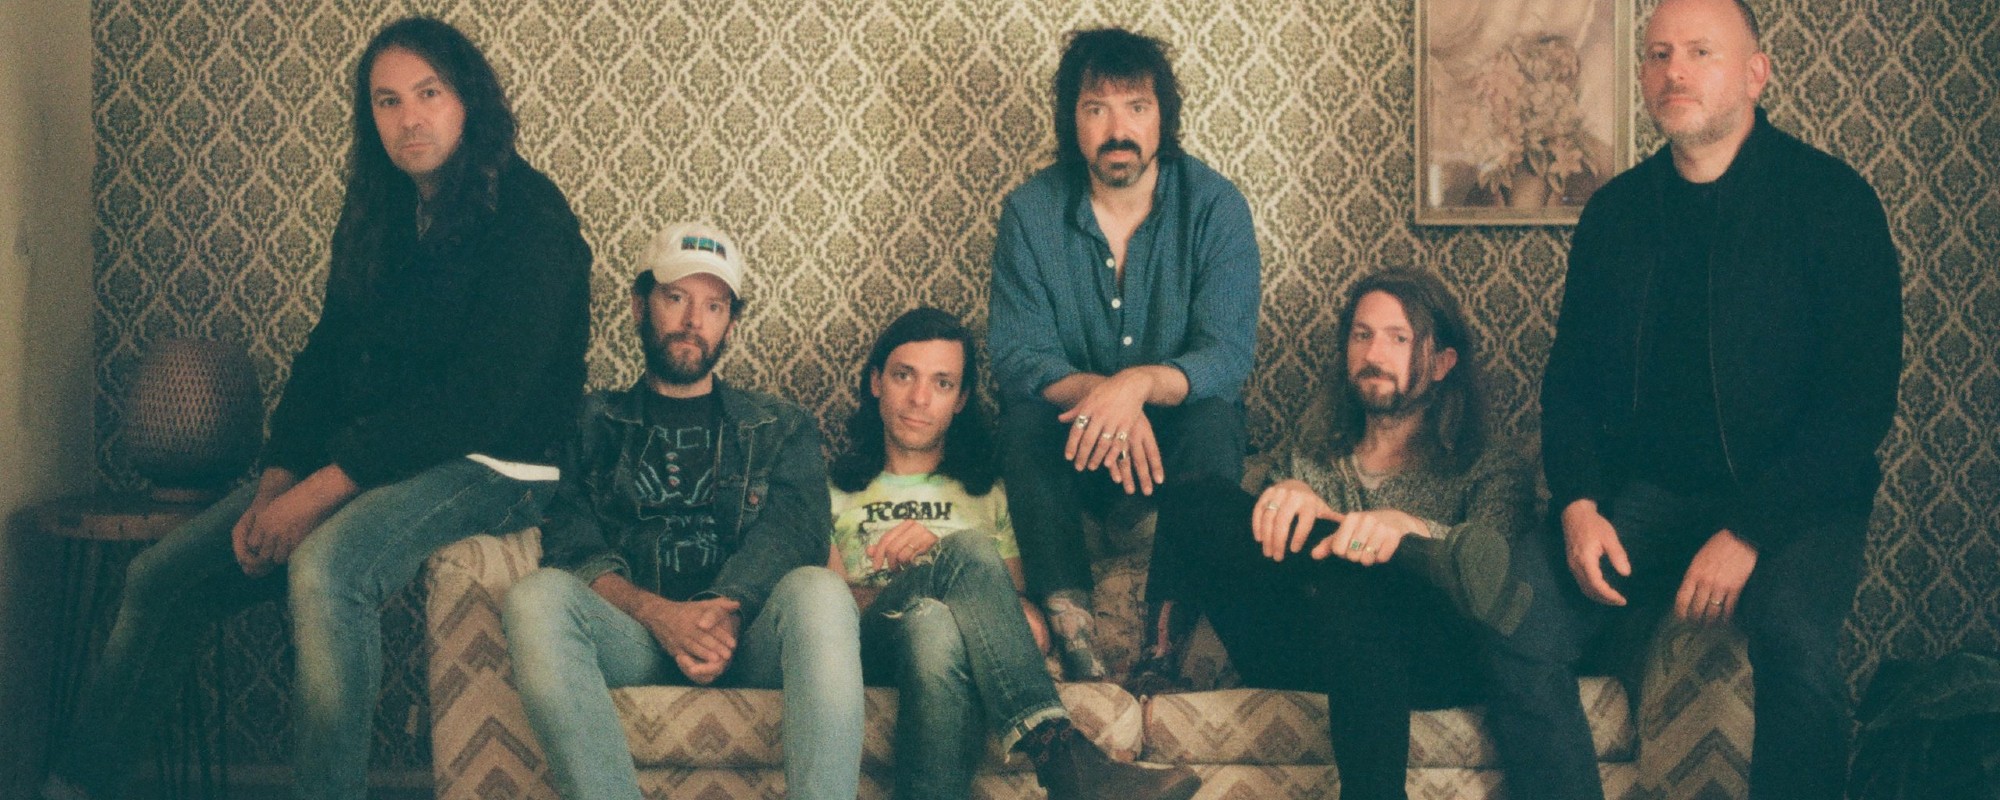 The War On Drugs Ready New Album, ‘I Don’t Live Here Anymore’